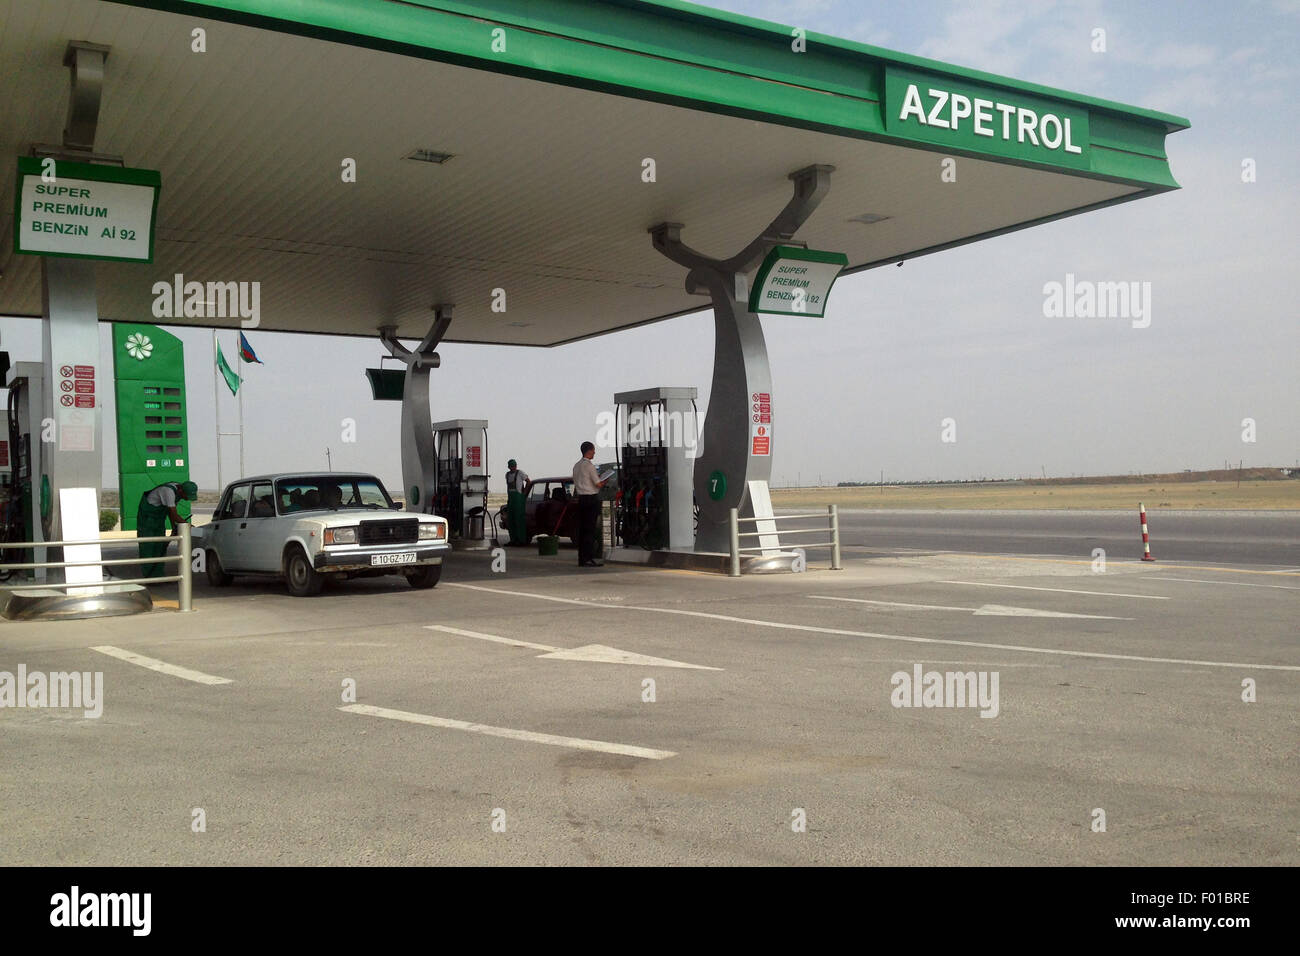 Azpetrol petrol station in Azerbaijan. Azpetrol Ltd. LLC is an Azerbaijani oil and gas company, with 88 filling stations in the country. Stock Photo